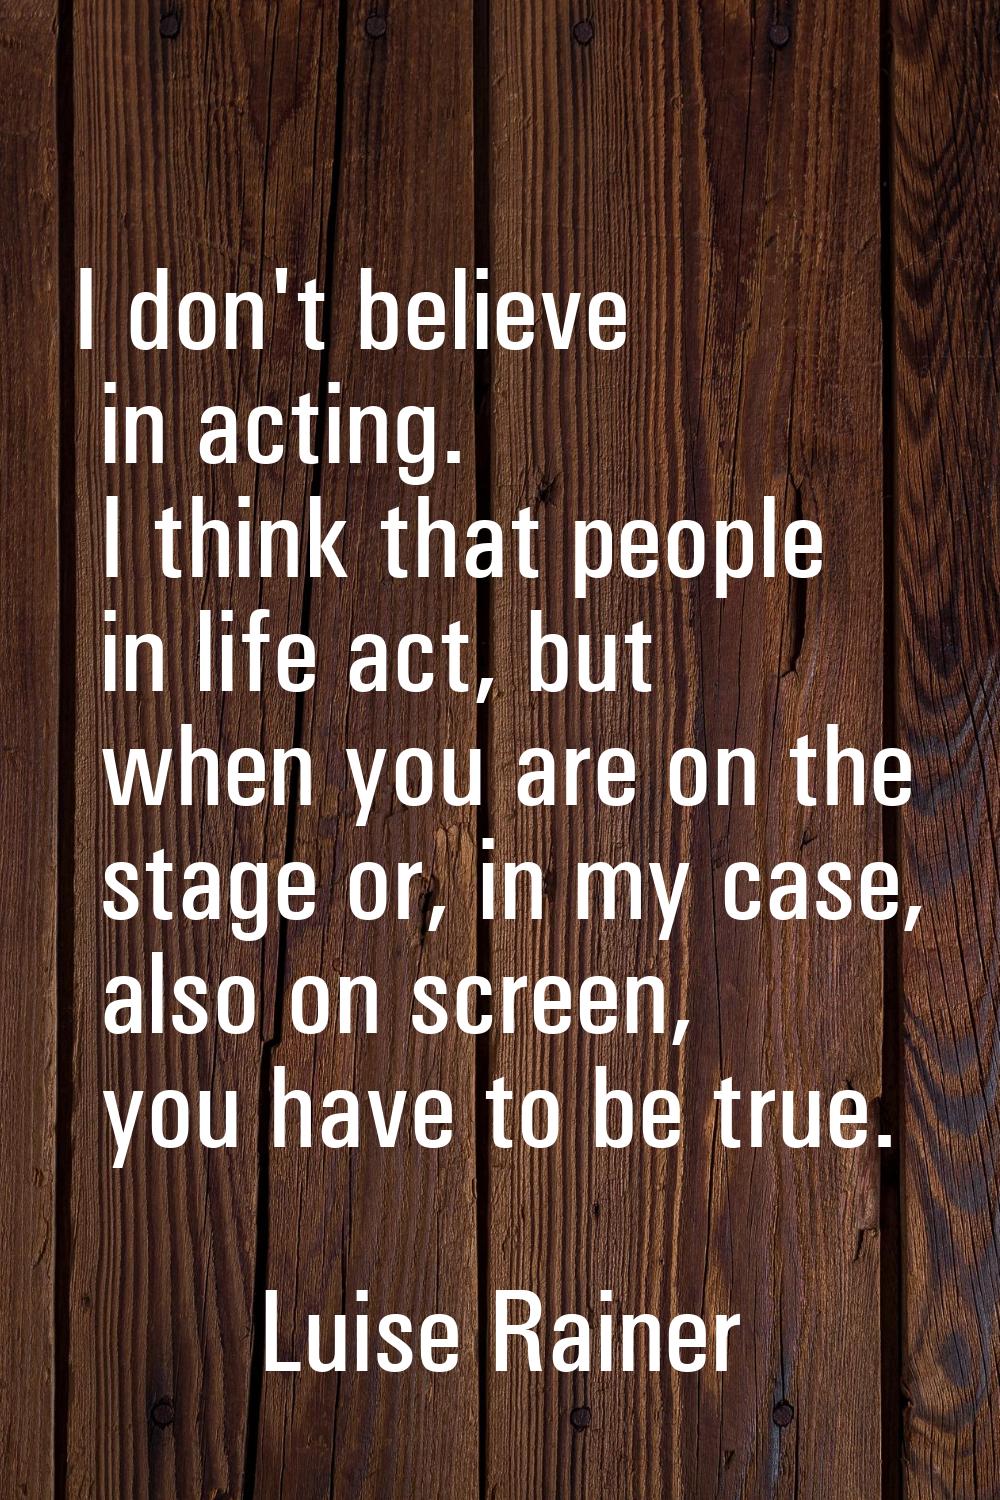 I don't believe in acting. I think that people in life act, but when you are on the stage or, in my